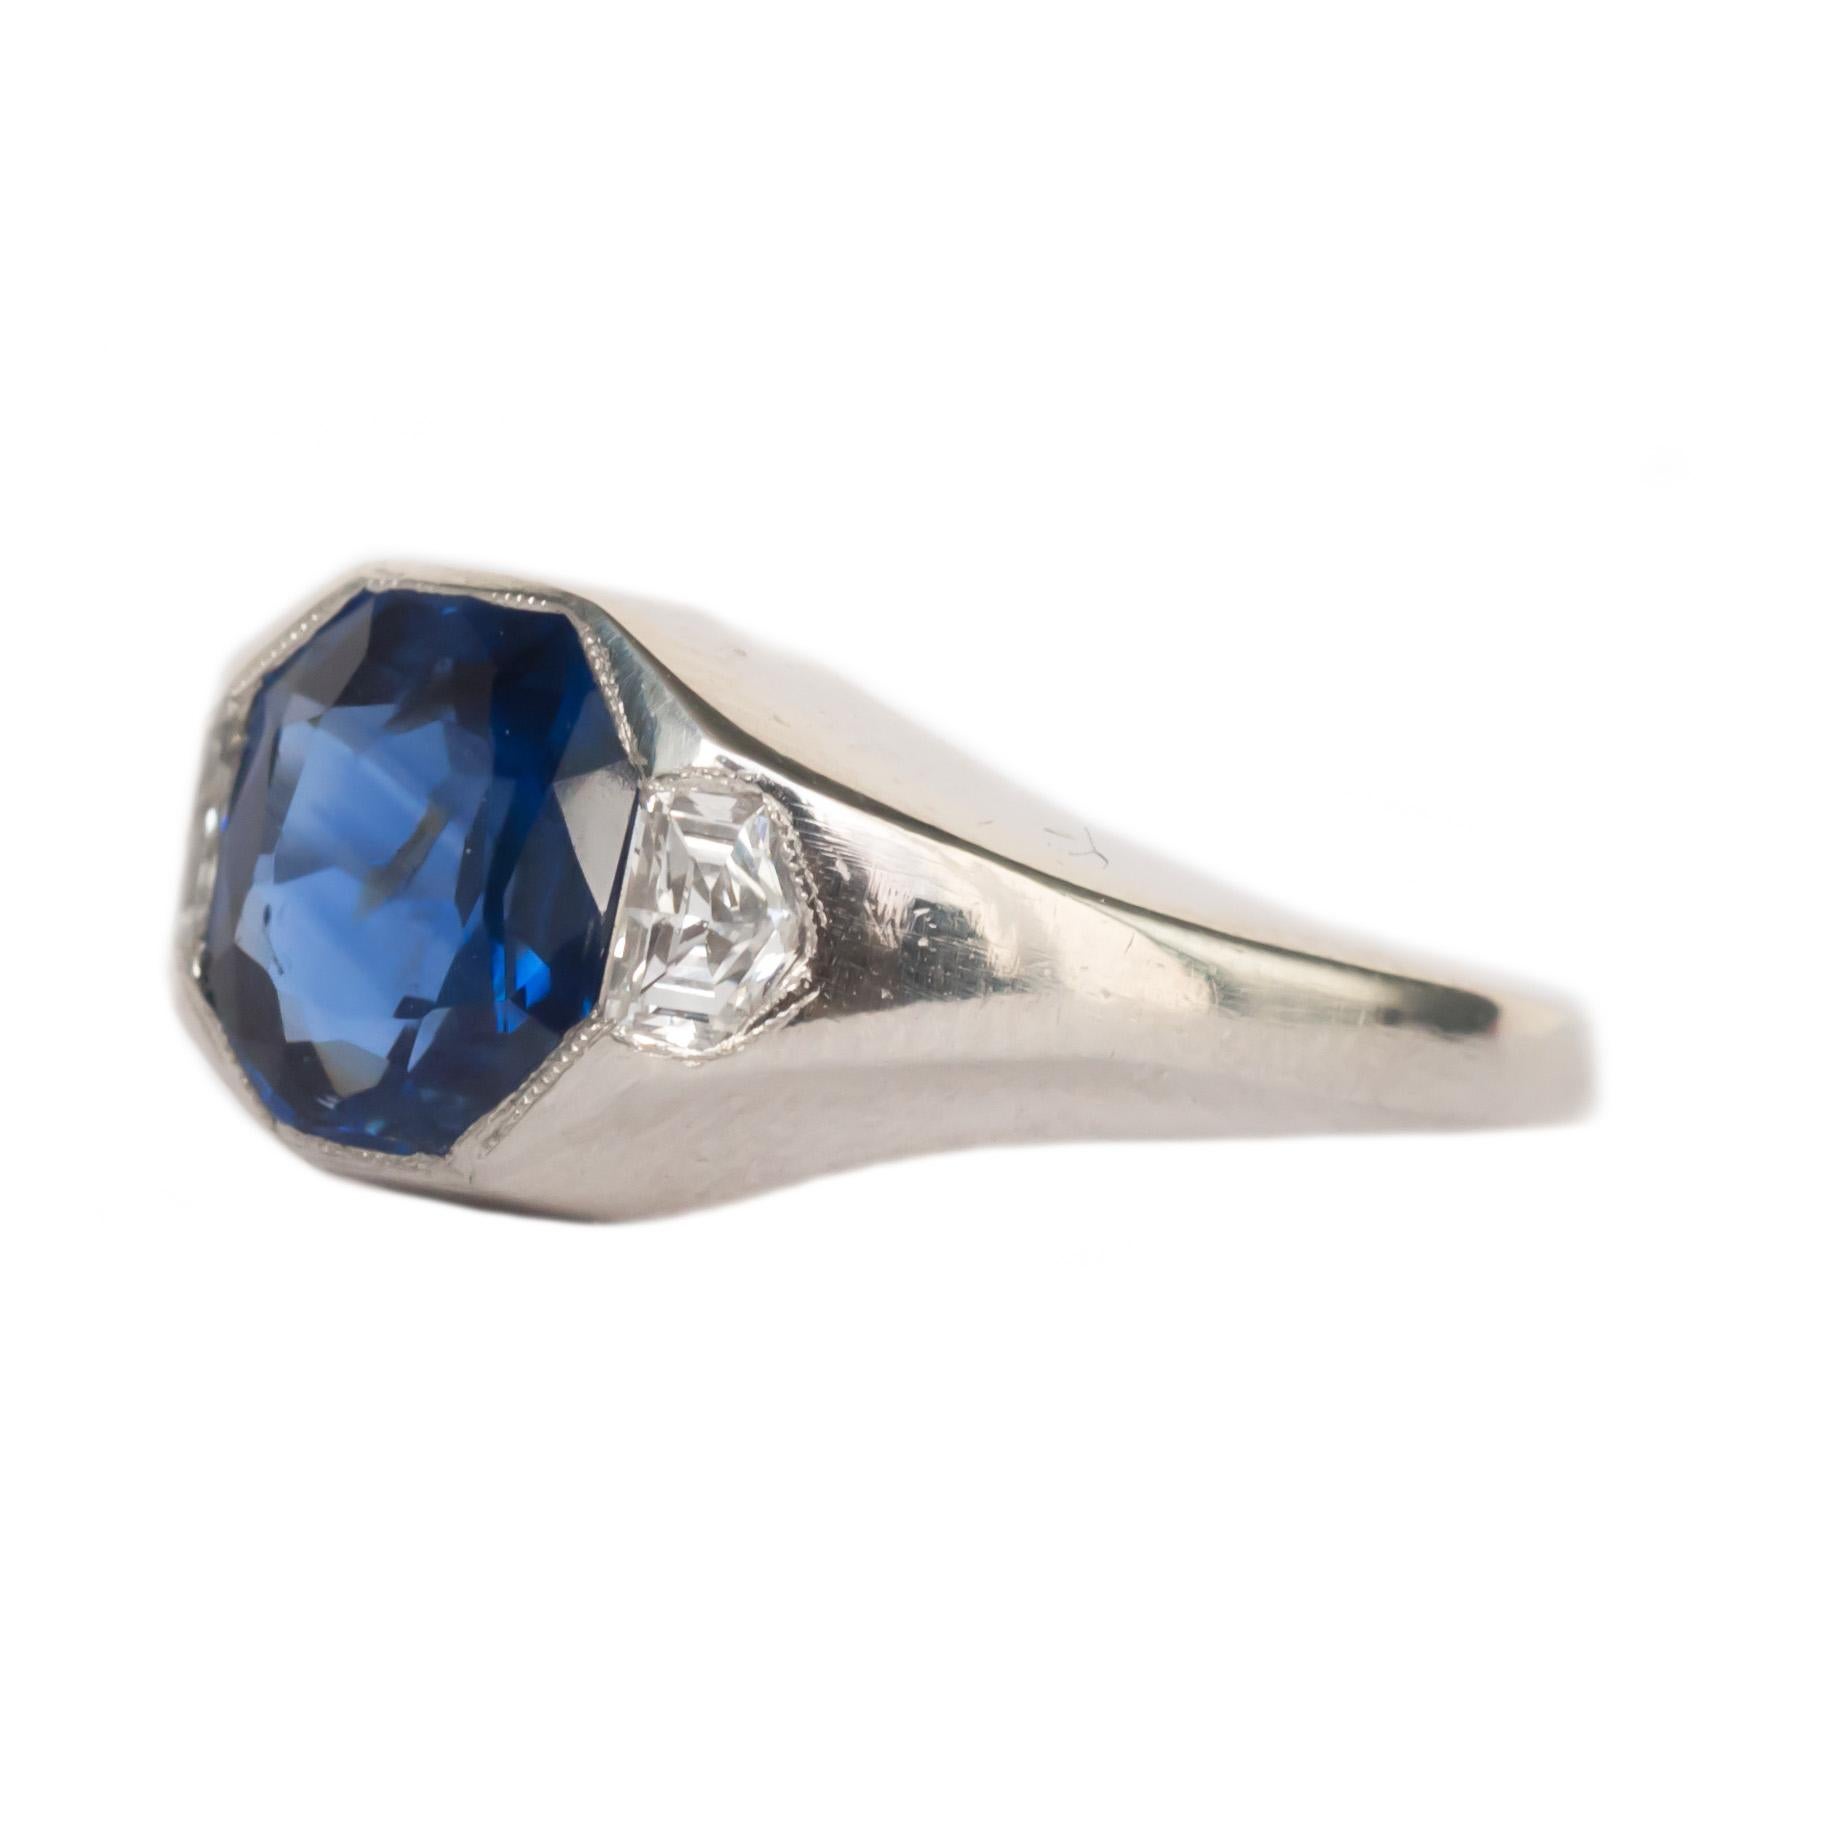 Ring Size: 6
Metal Type: Platinum  [Hallmarked, and Tested]
Weight: 7.4  grams

Diamond Details:
AGL Certified 
Type: Sapphire
Weight: 1.86 carat
Cut: Octagonal Mixed Cut 

Side Stones:
Shape: Antique Trapezoid 
Carat: .30 carat, total weight
Color: